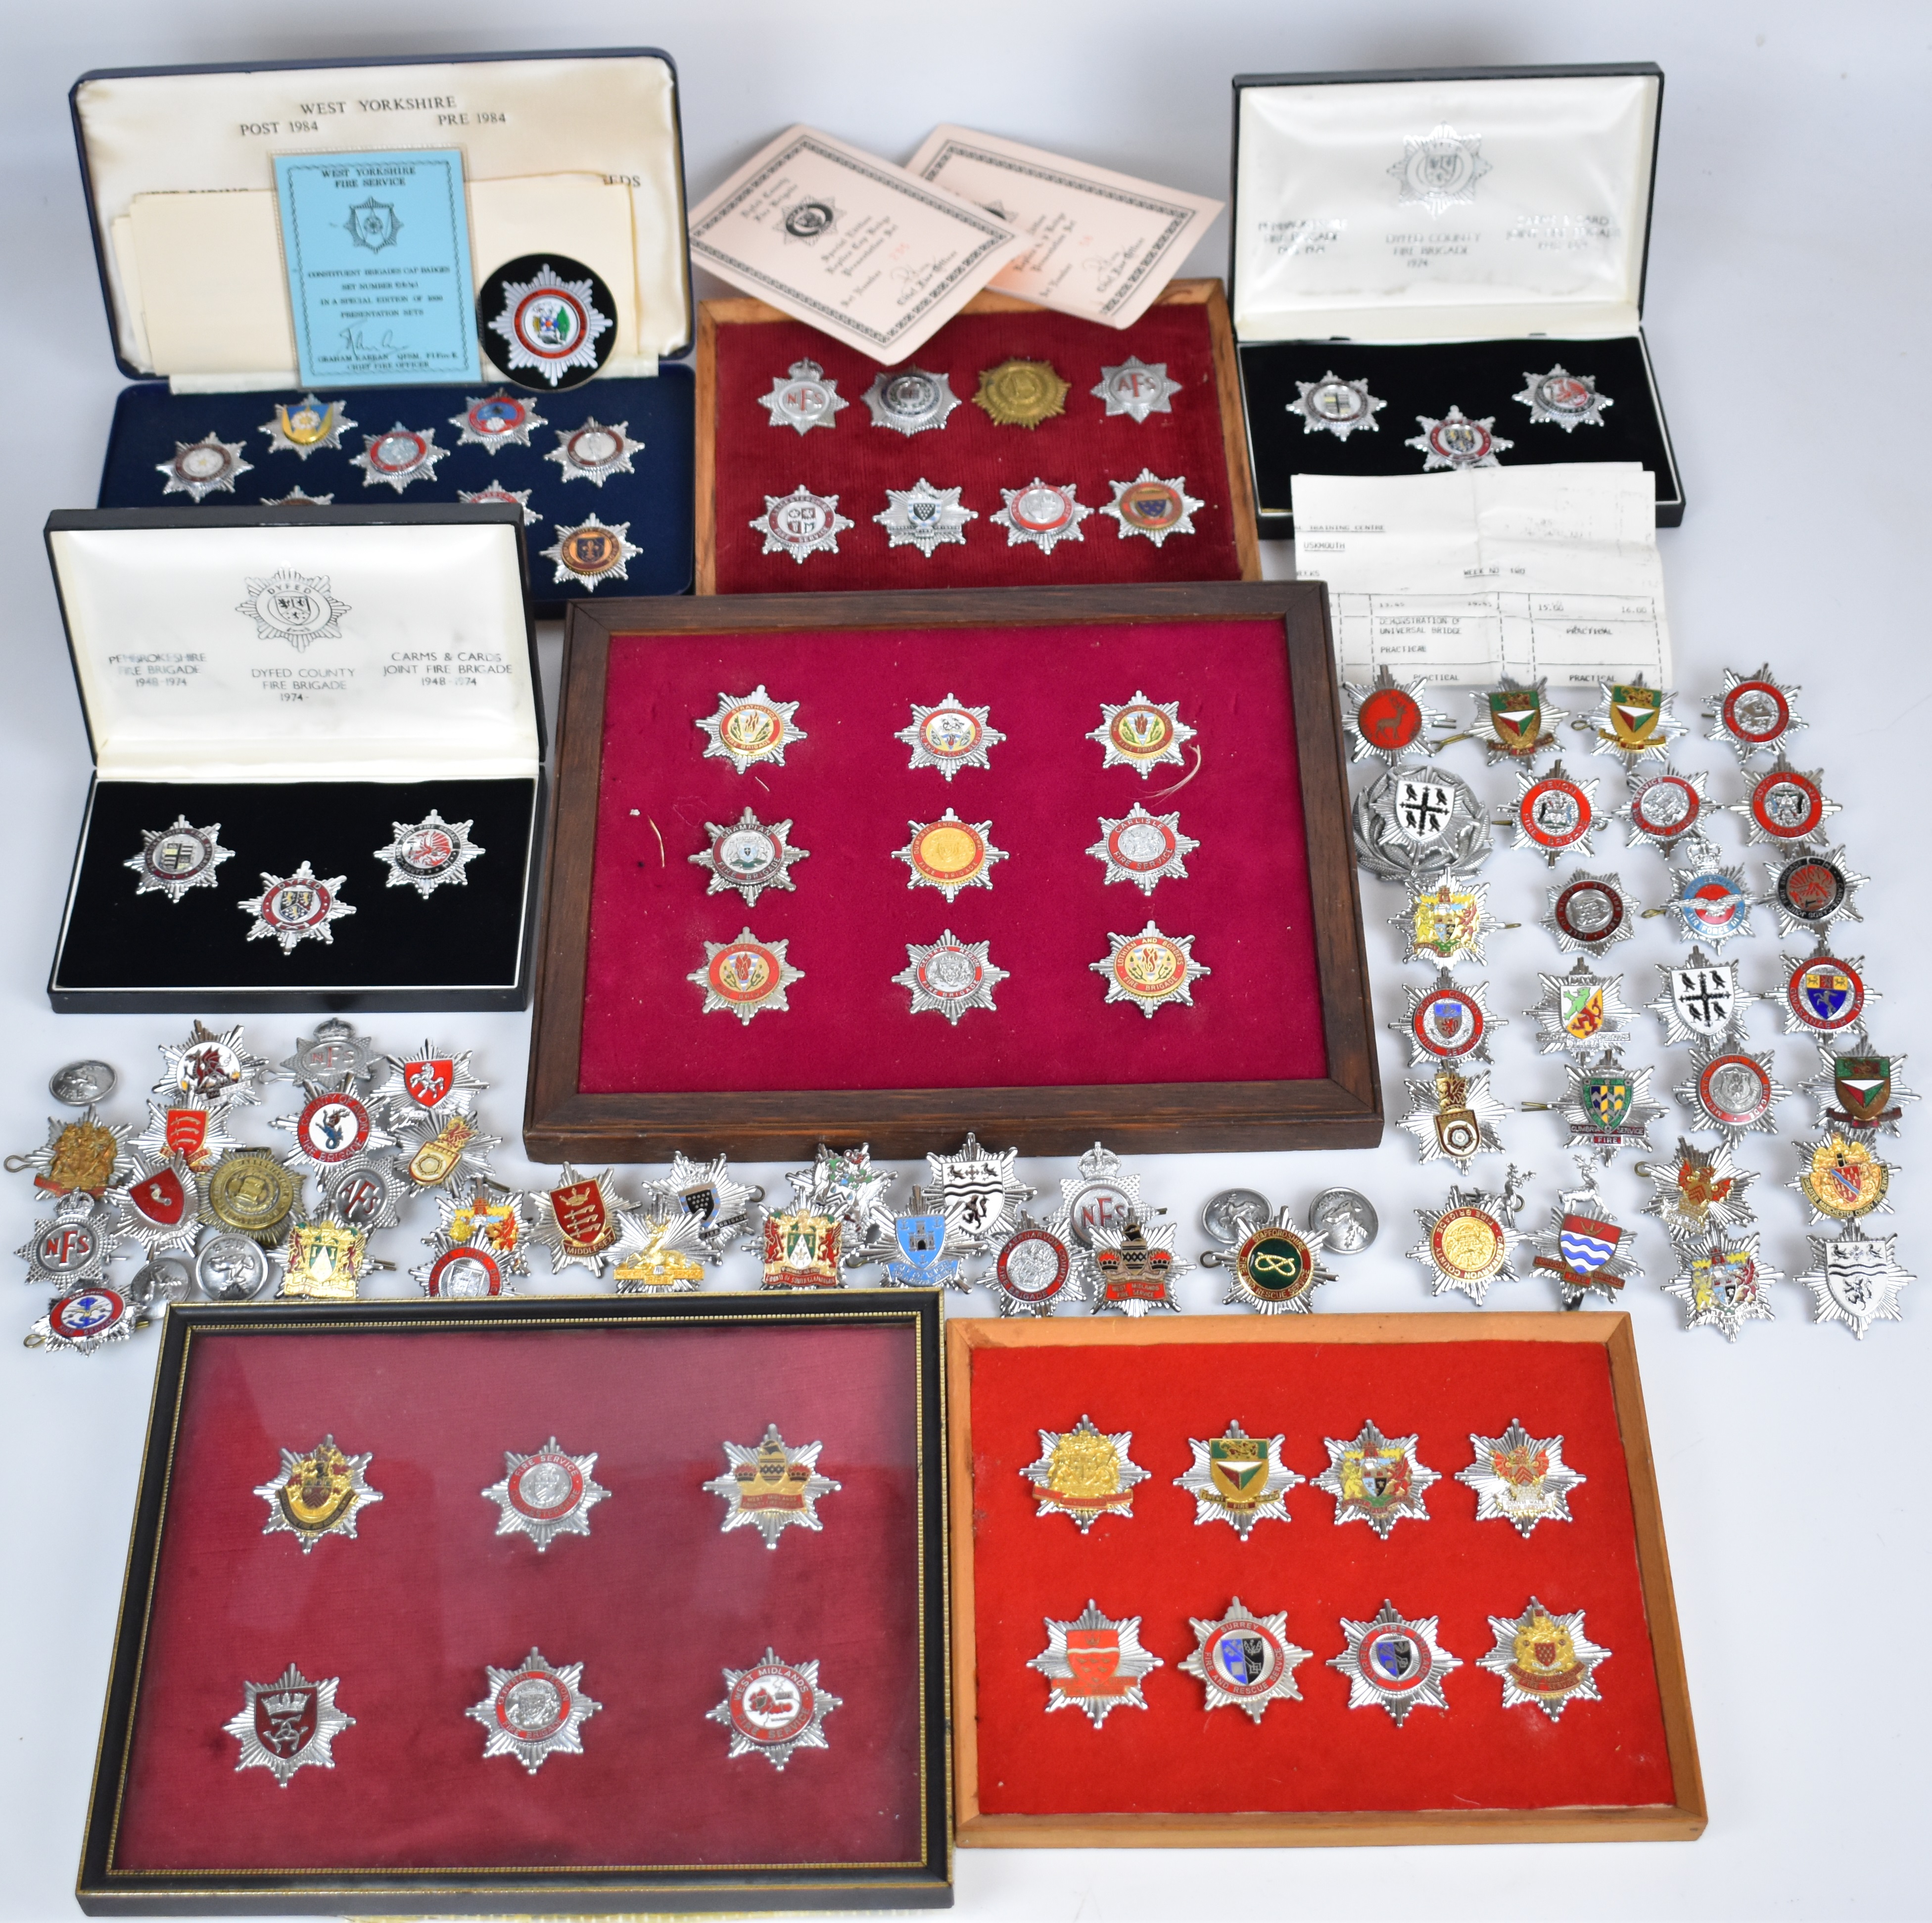 Approximately 100 Fire Brigade metal badges including Isle of Wight Fire Brigade, Cardiff City